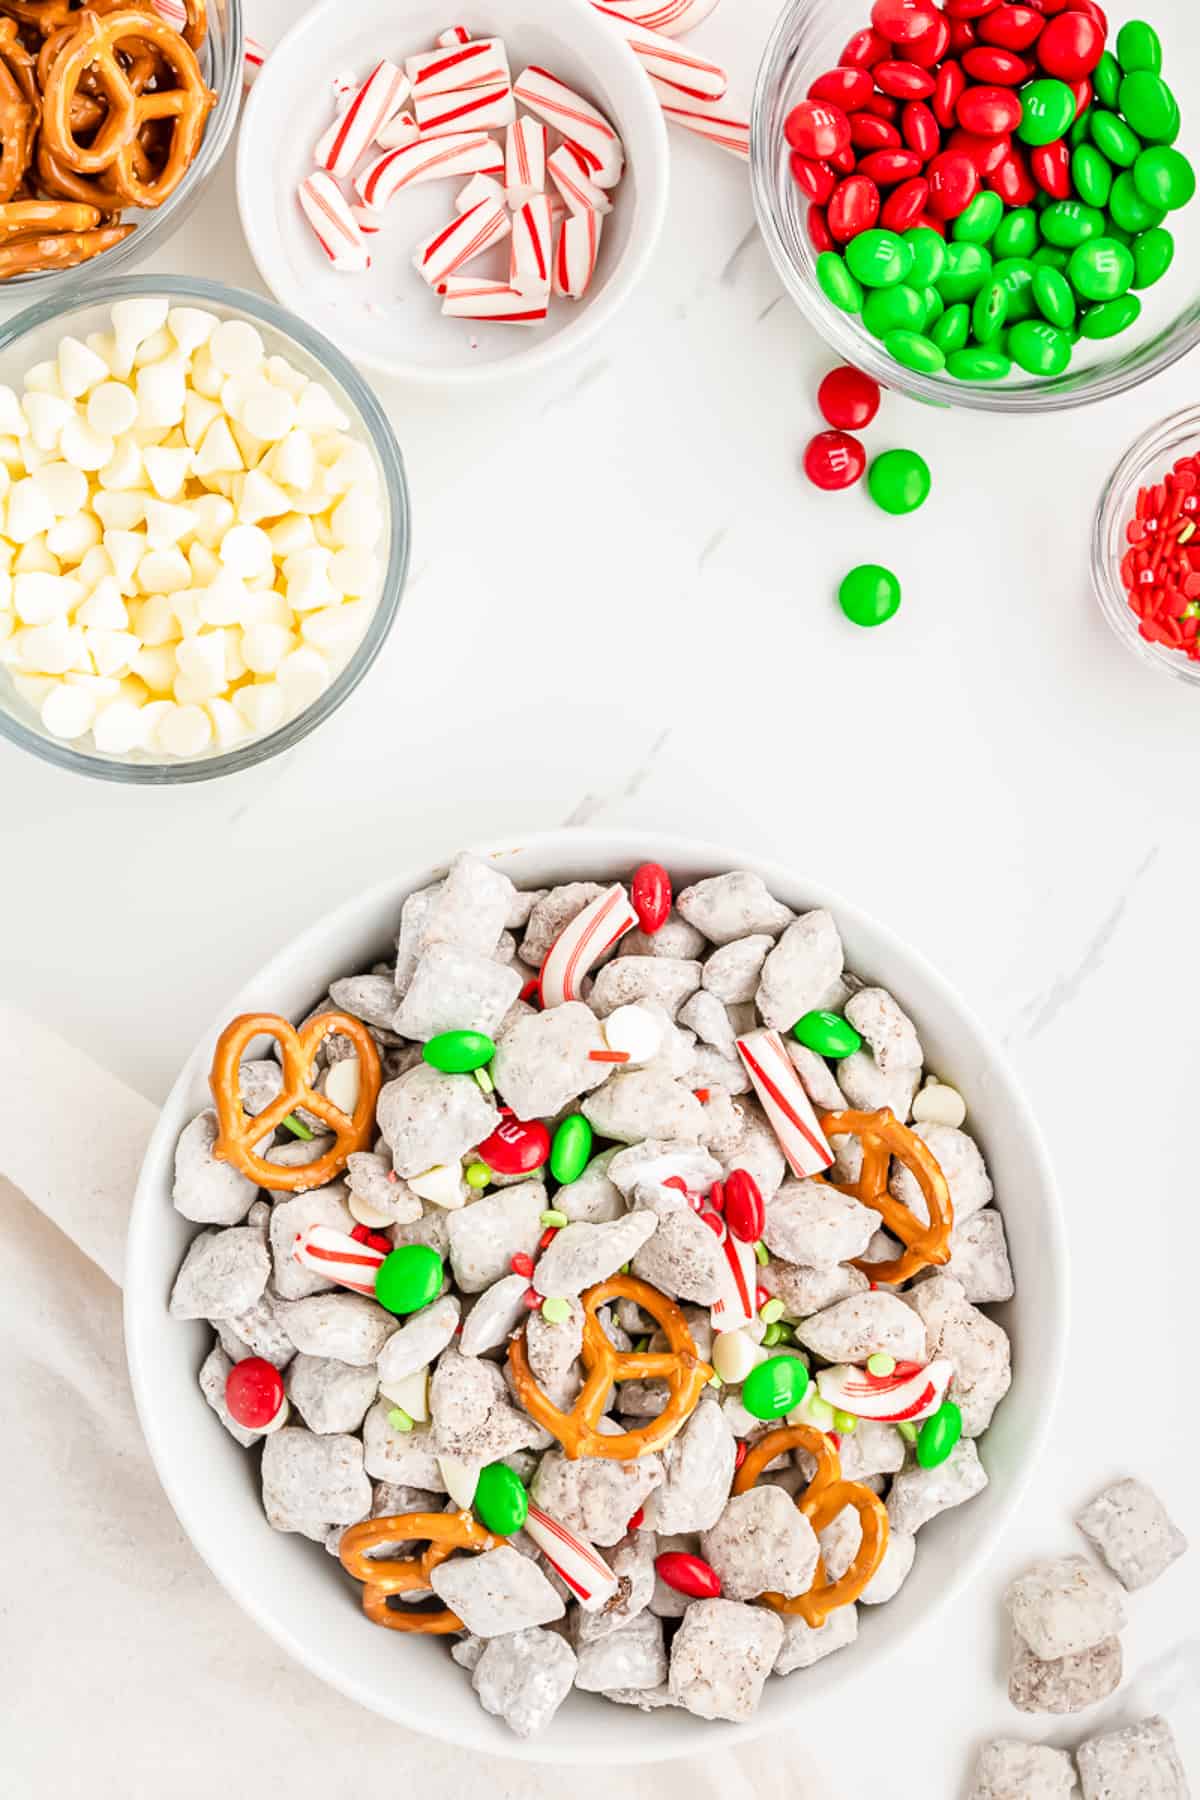 Christmas reindeer chex mix topped with colorful M&Ms, peppermint pieces, white chocolate chips, and pretzels in a bowl on the counter from overhead with the other ingredients in bowls on the counter nearby.